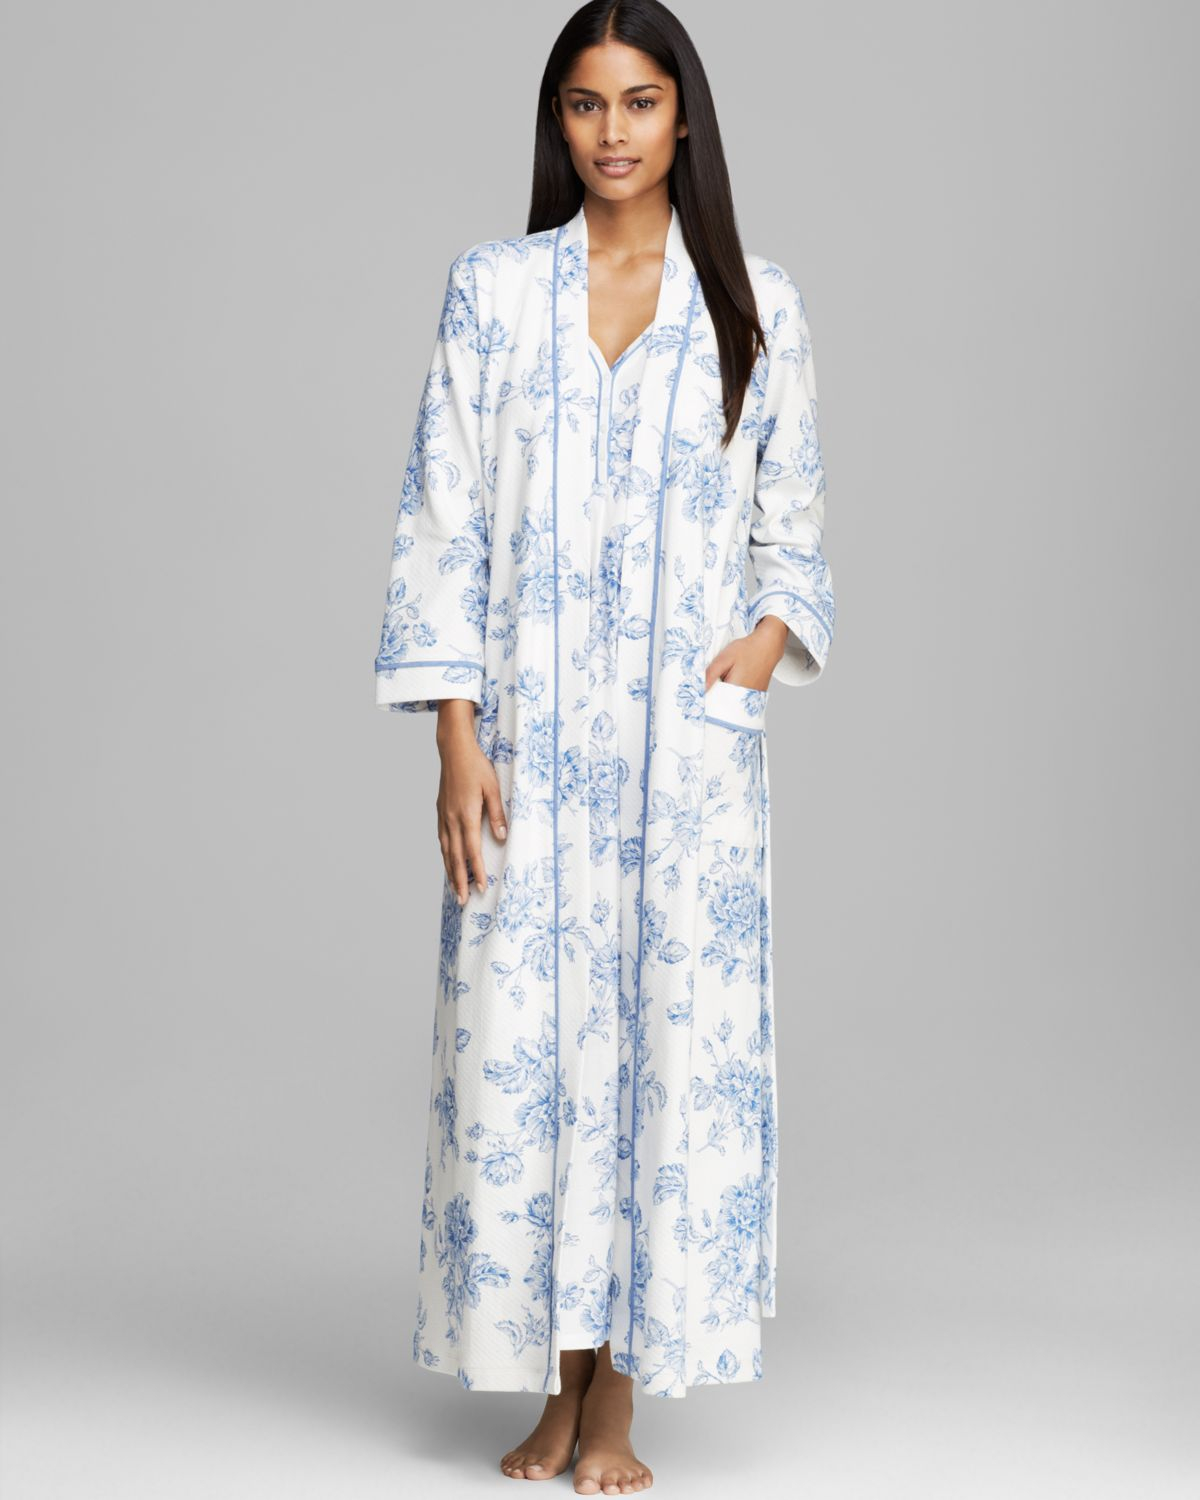 The Best Nursing Nightgown Robe and Pajama Sets